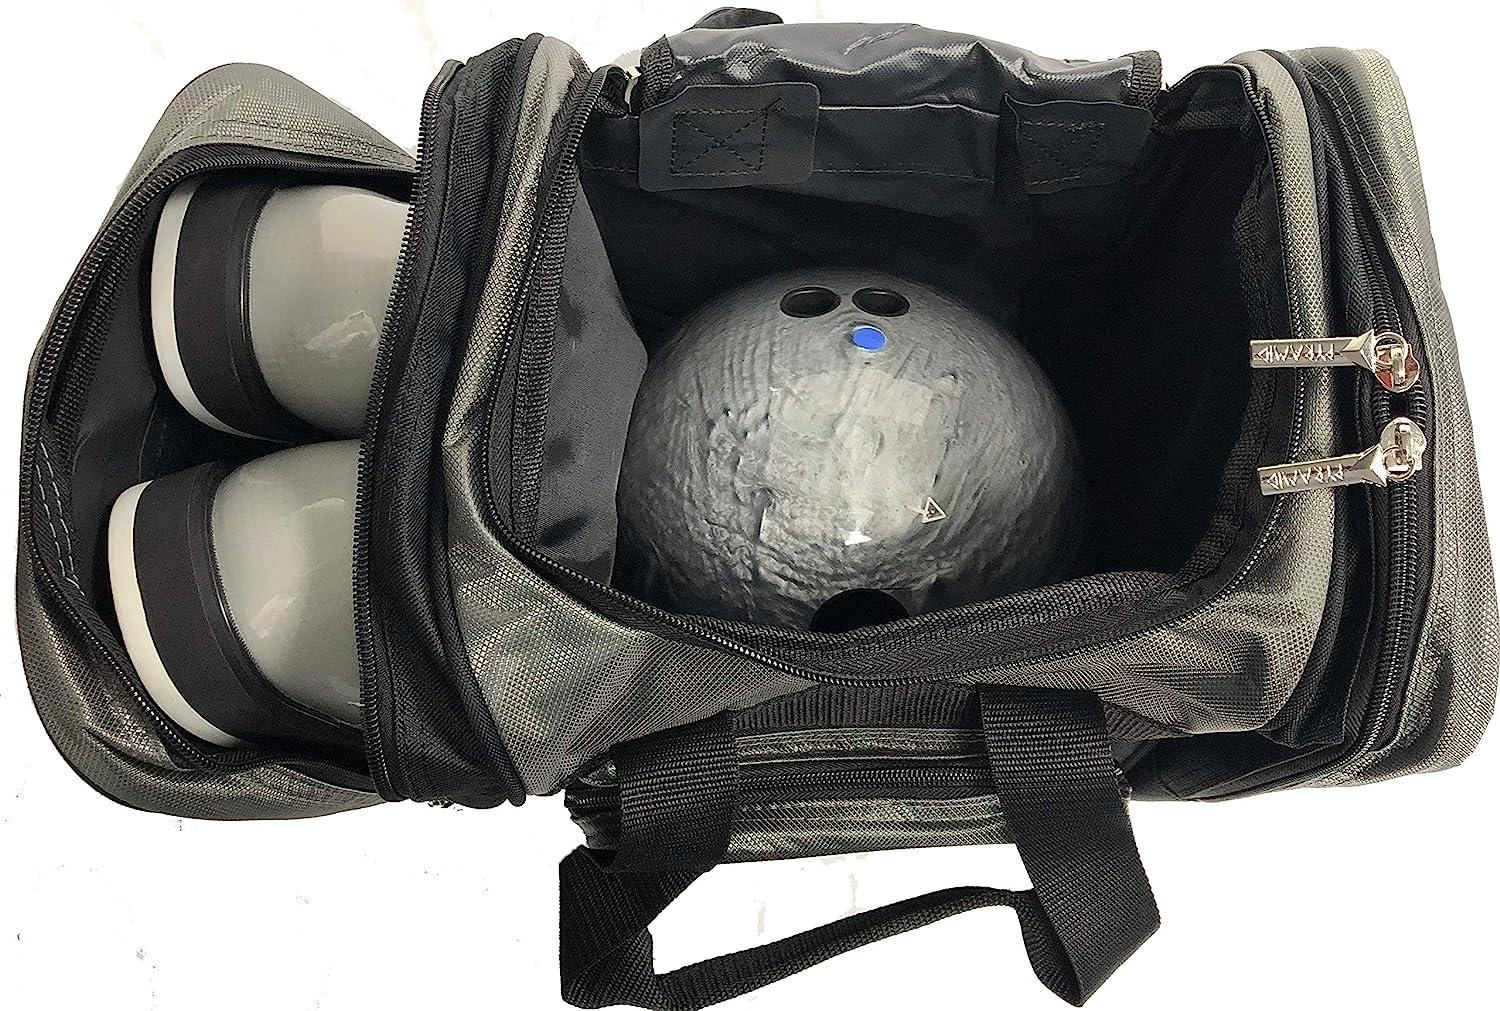 Bowling Ball Bag Bowling Ball Pouch For Men Bowling Bag Holds 1 Bowling Ball  A Pair Of Shoes Up To Mens Size 10 Shoes